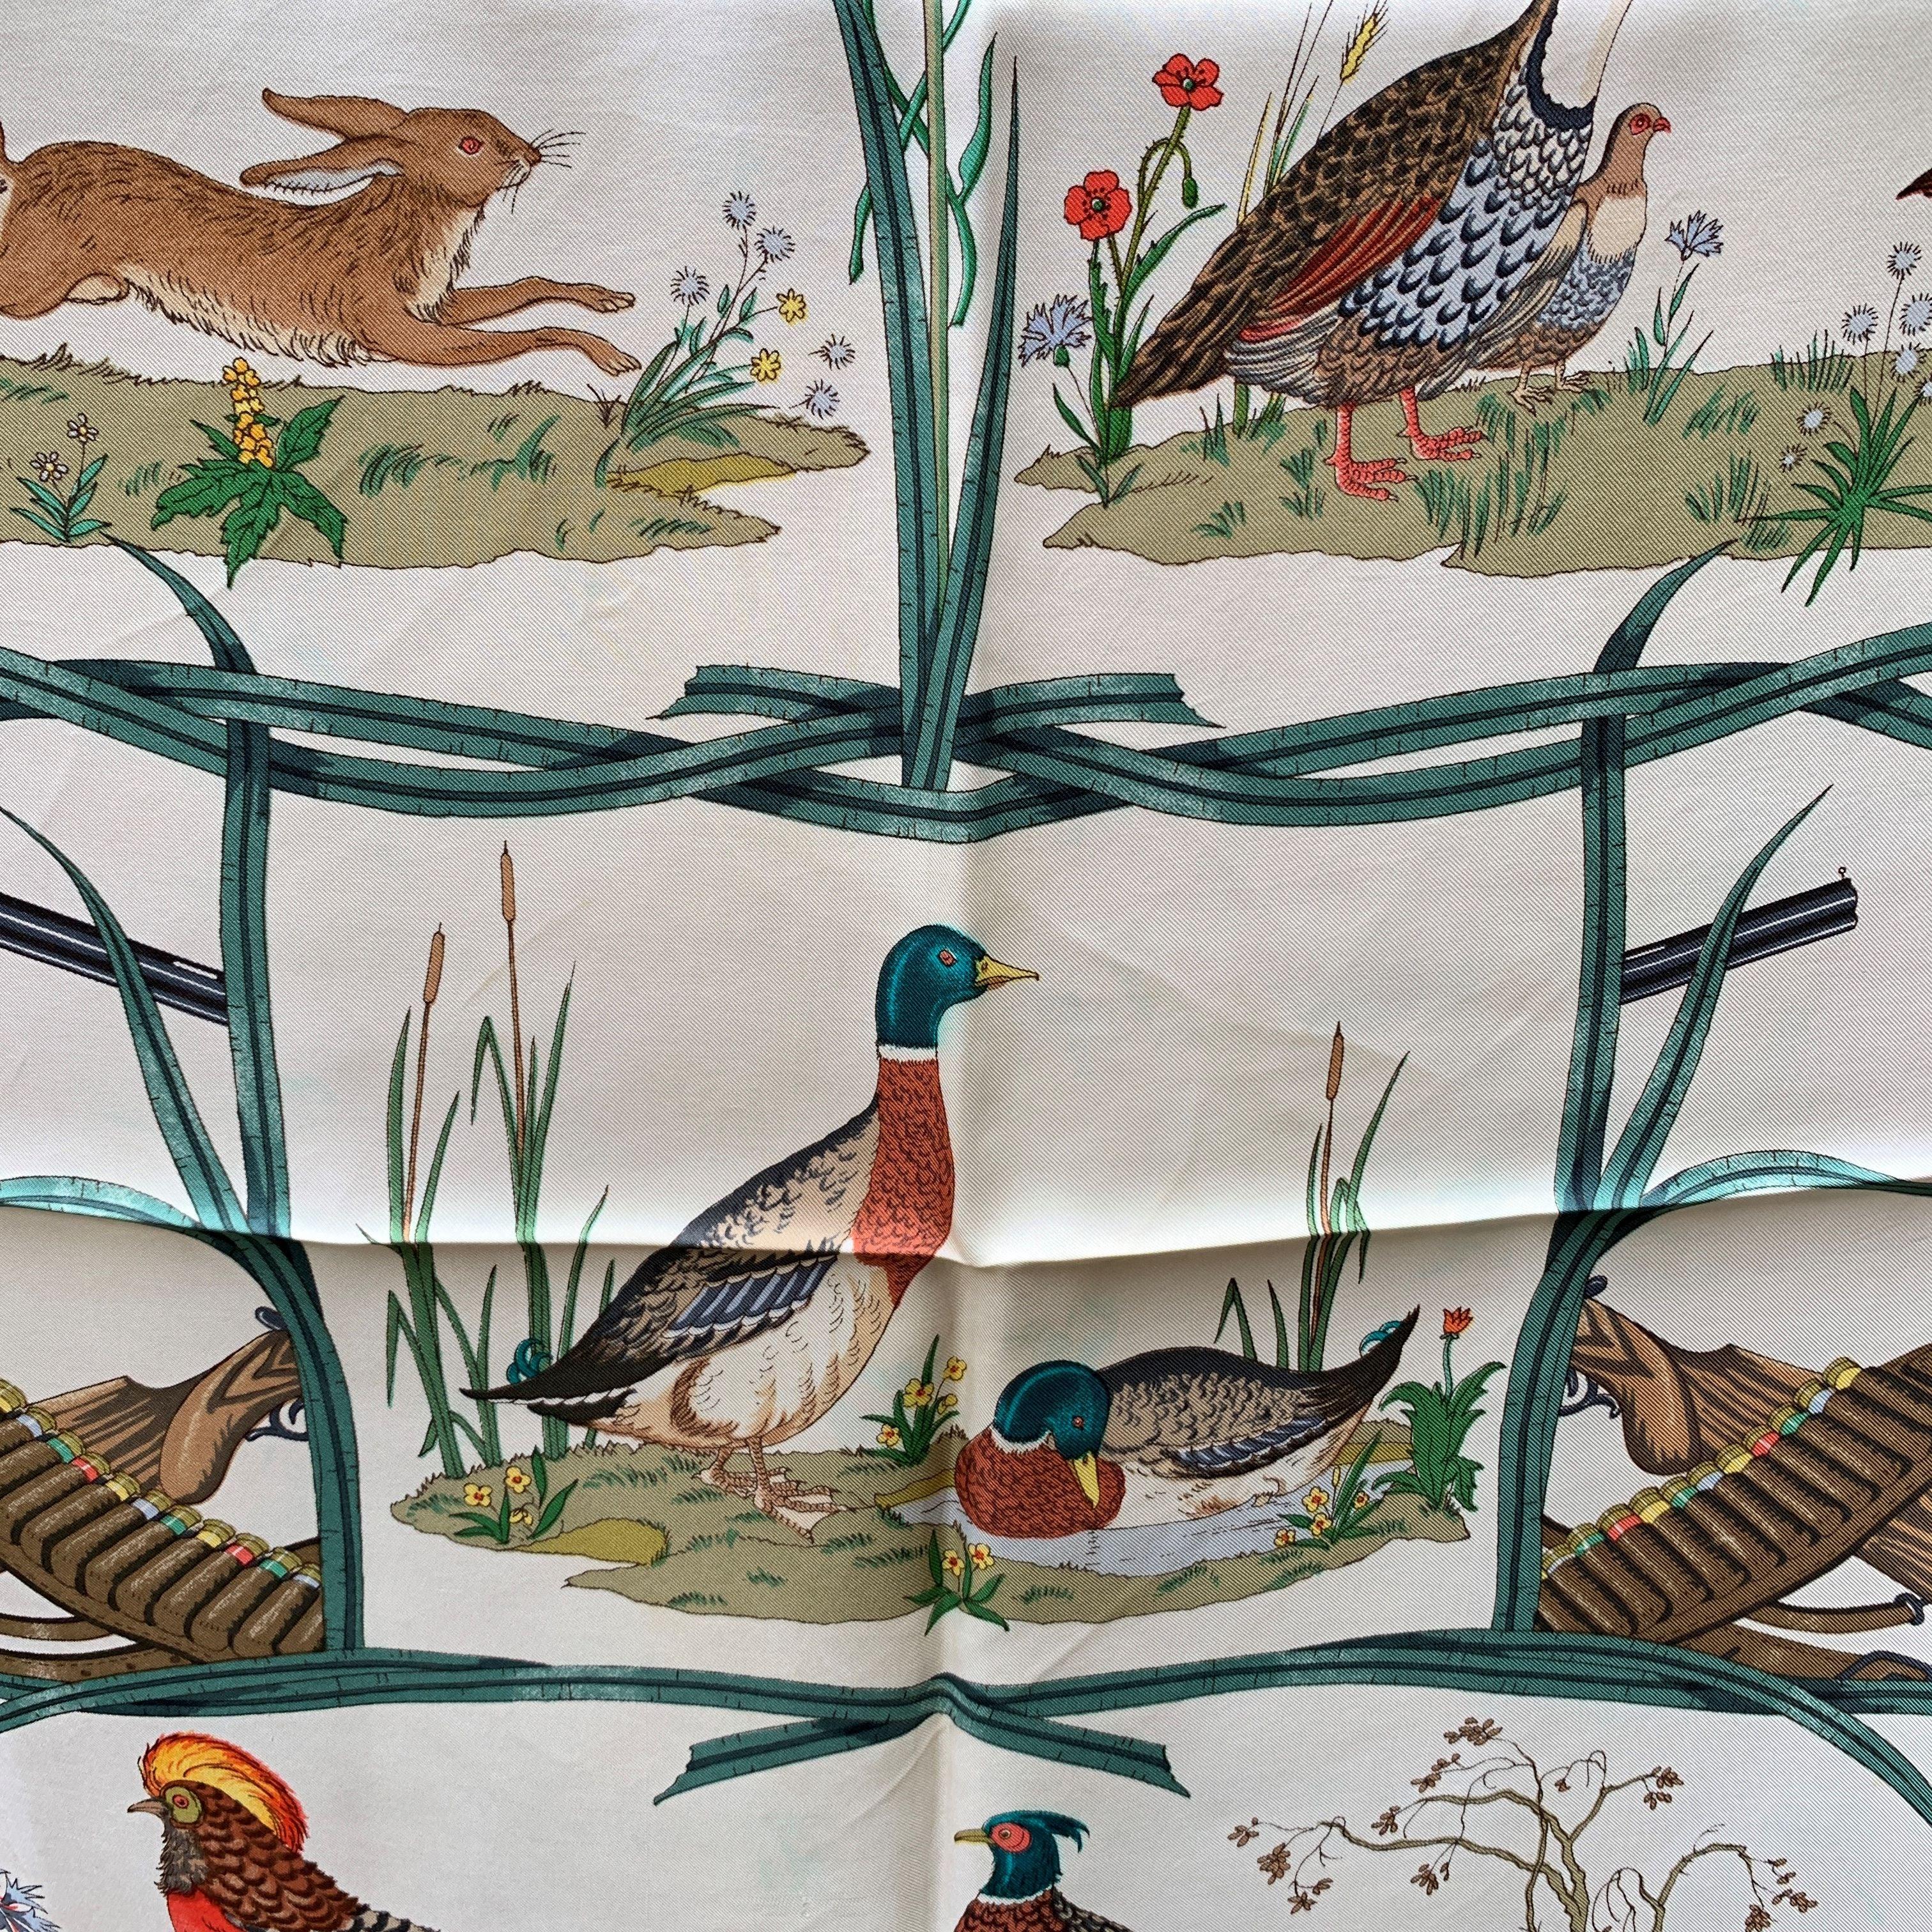 Vintage Gucci silk scarf designed by the artist Vittorio Accornero. He was the textile designer for Gucci between the 1960s and 1981. It depicts images of game (pheasants, mallards, partridges, hares), surrounded by various flowers (buttercups,